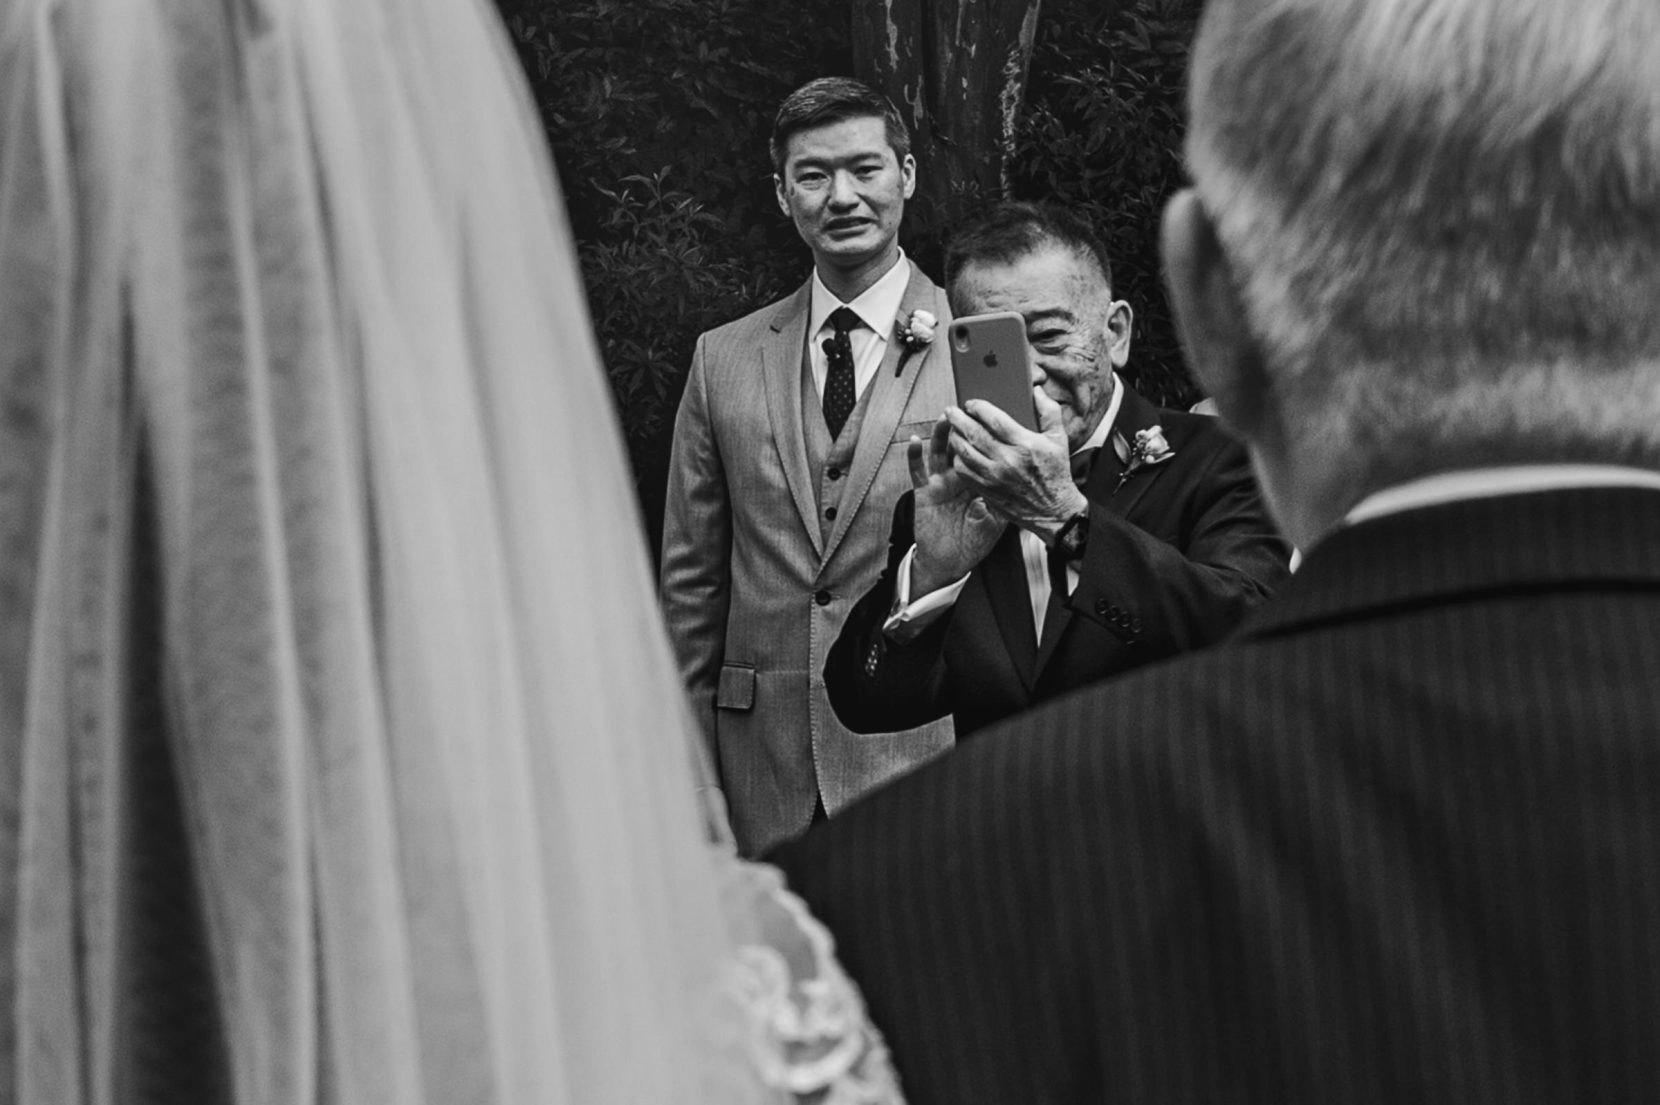 father of groom takes cell phone photo during wedding processional